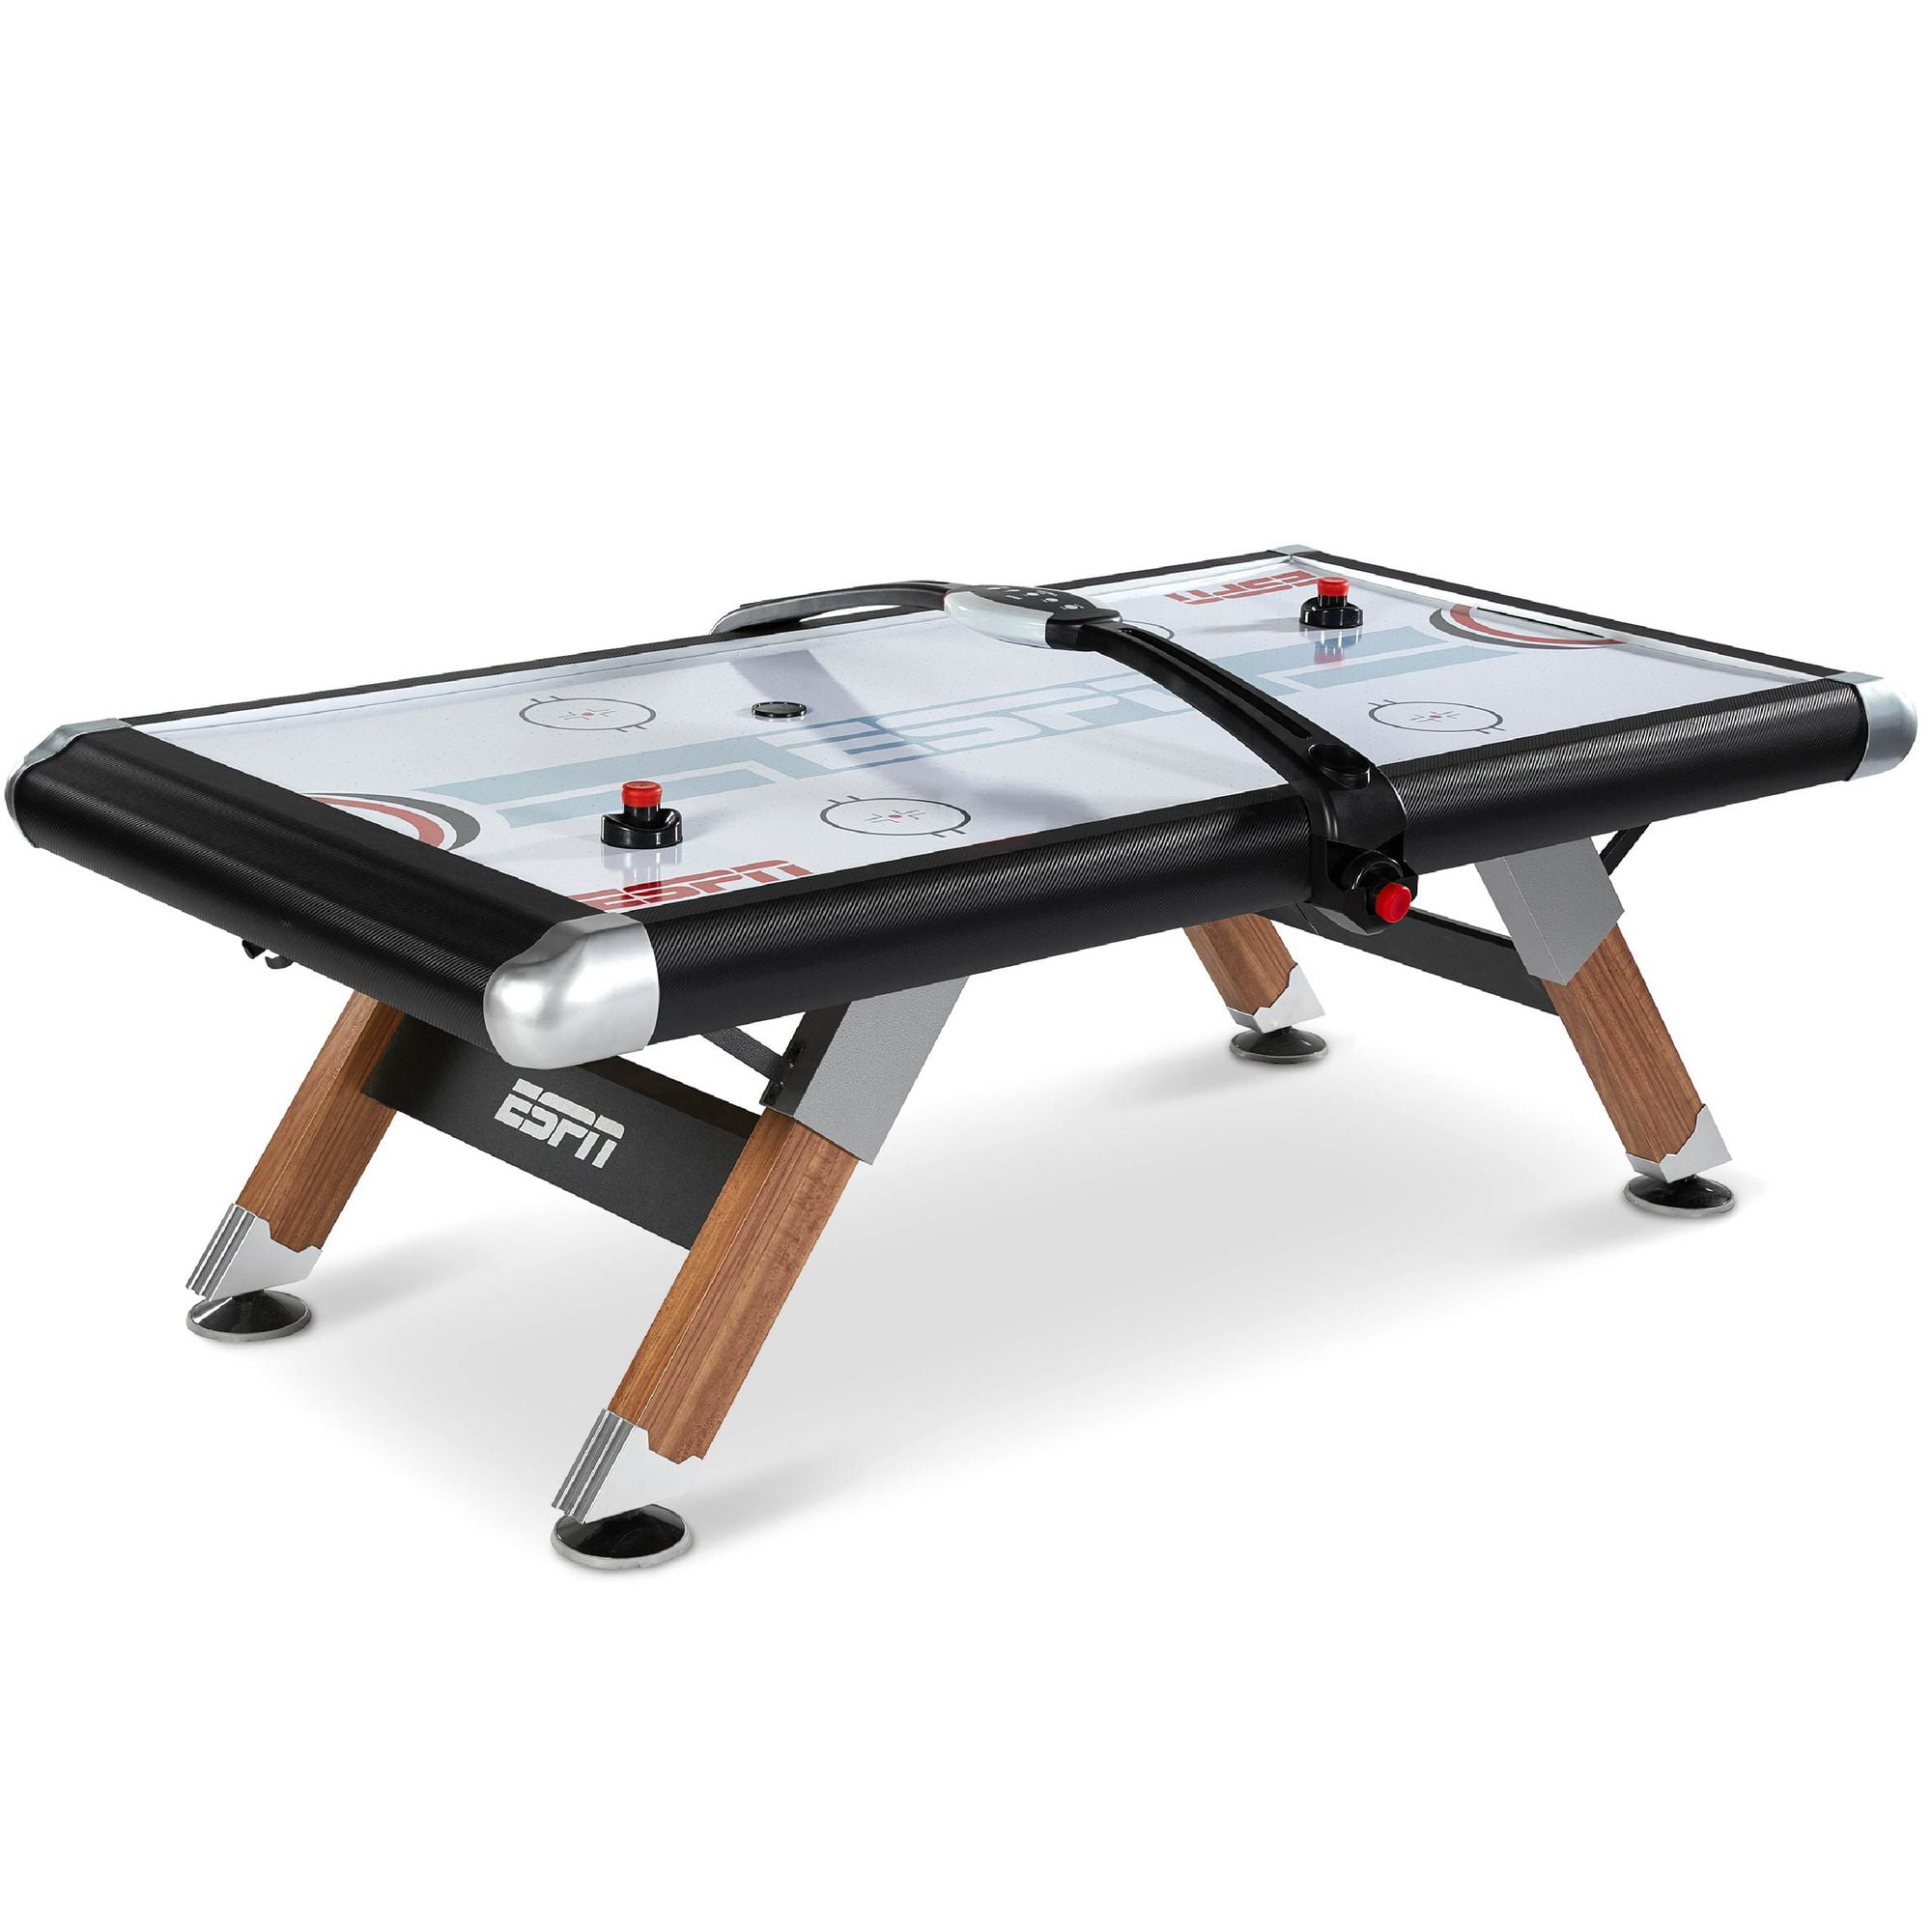 Espn Belham Collection 8 Ft Air Powered Hockey Table With